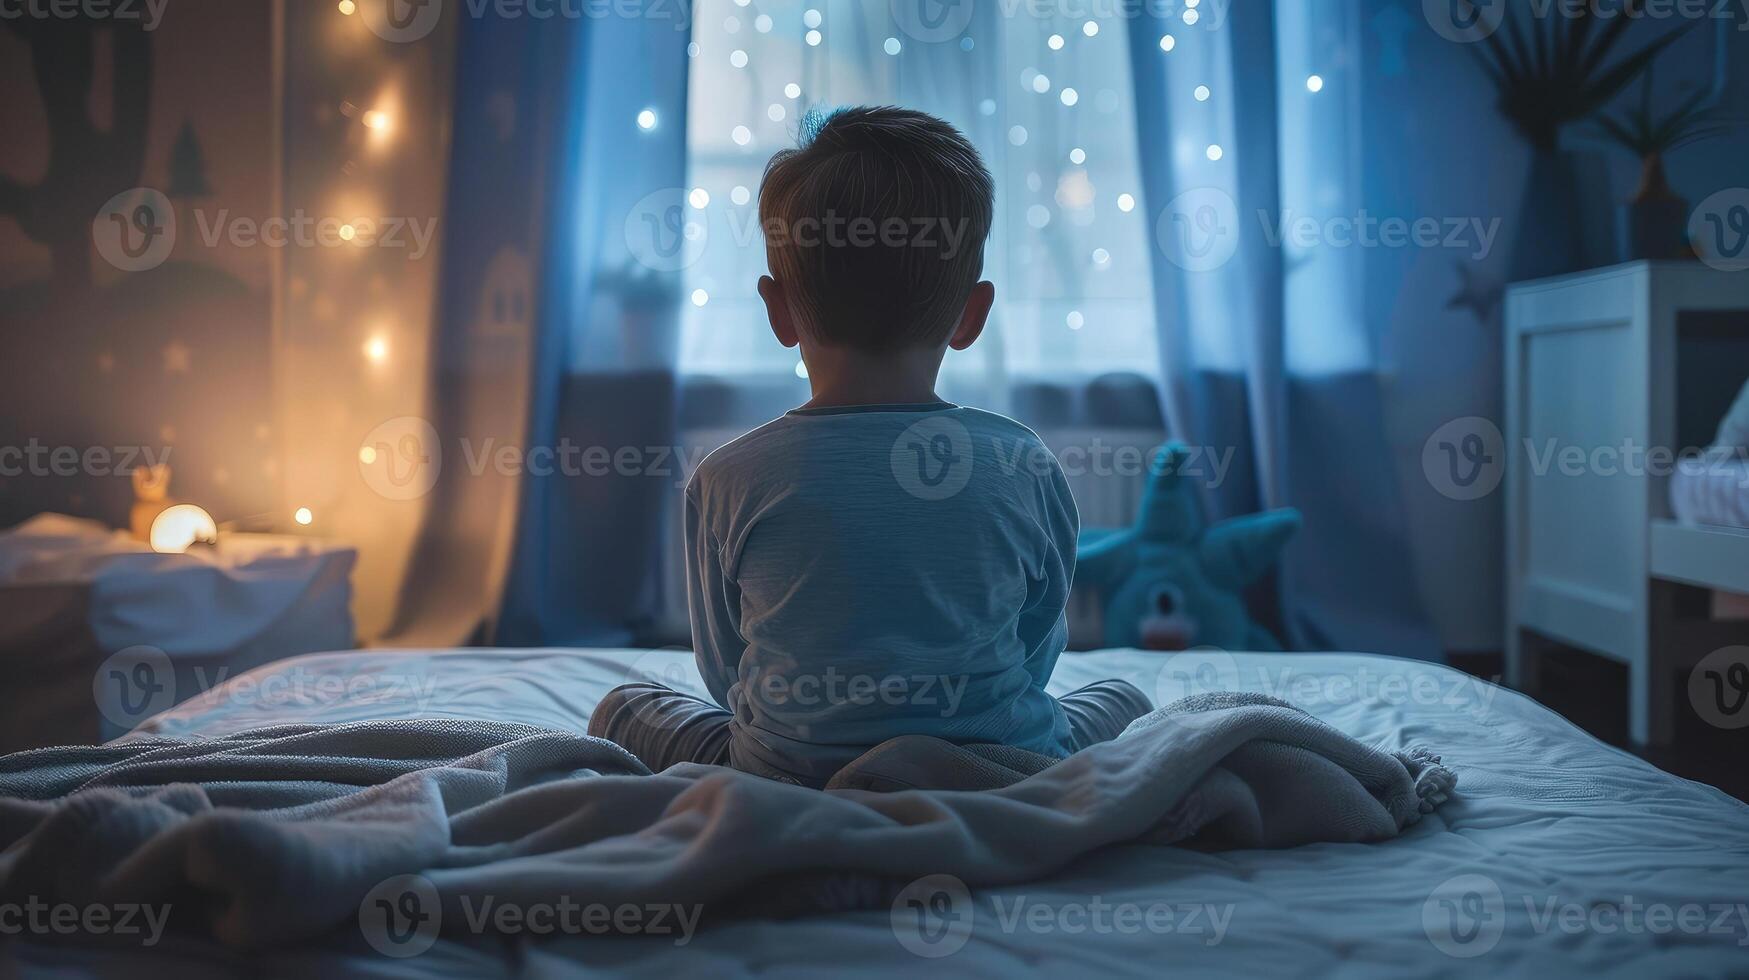 Back View Of Little Boy, Kid or Baby Sitting On Bed Under Blanket, Waiting For Tooth Fairy. Getting Ready To Sleep. Bedtime and Happy Dreams. photo